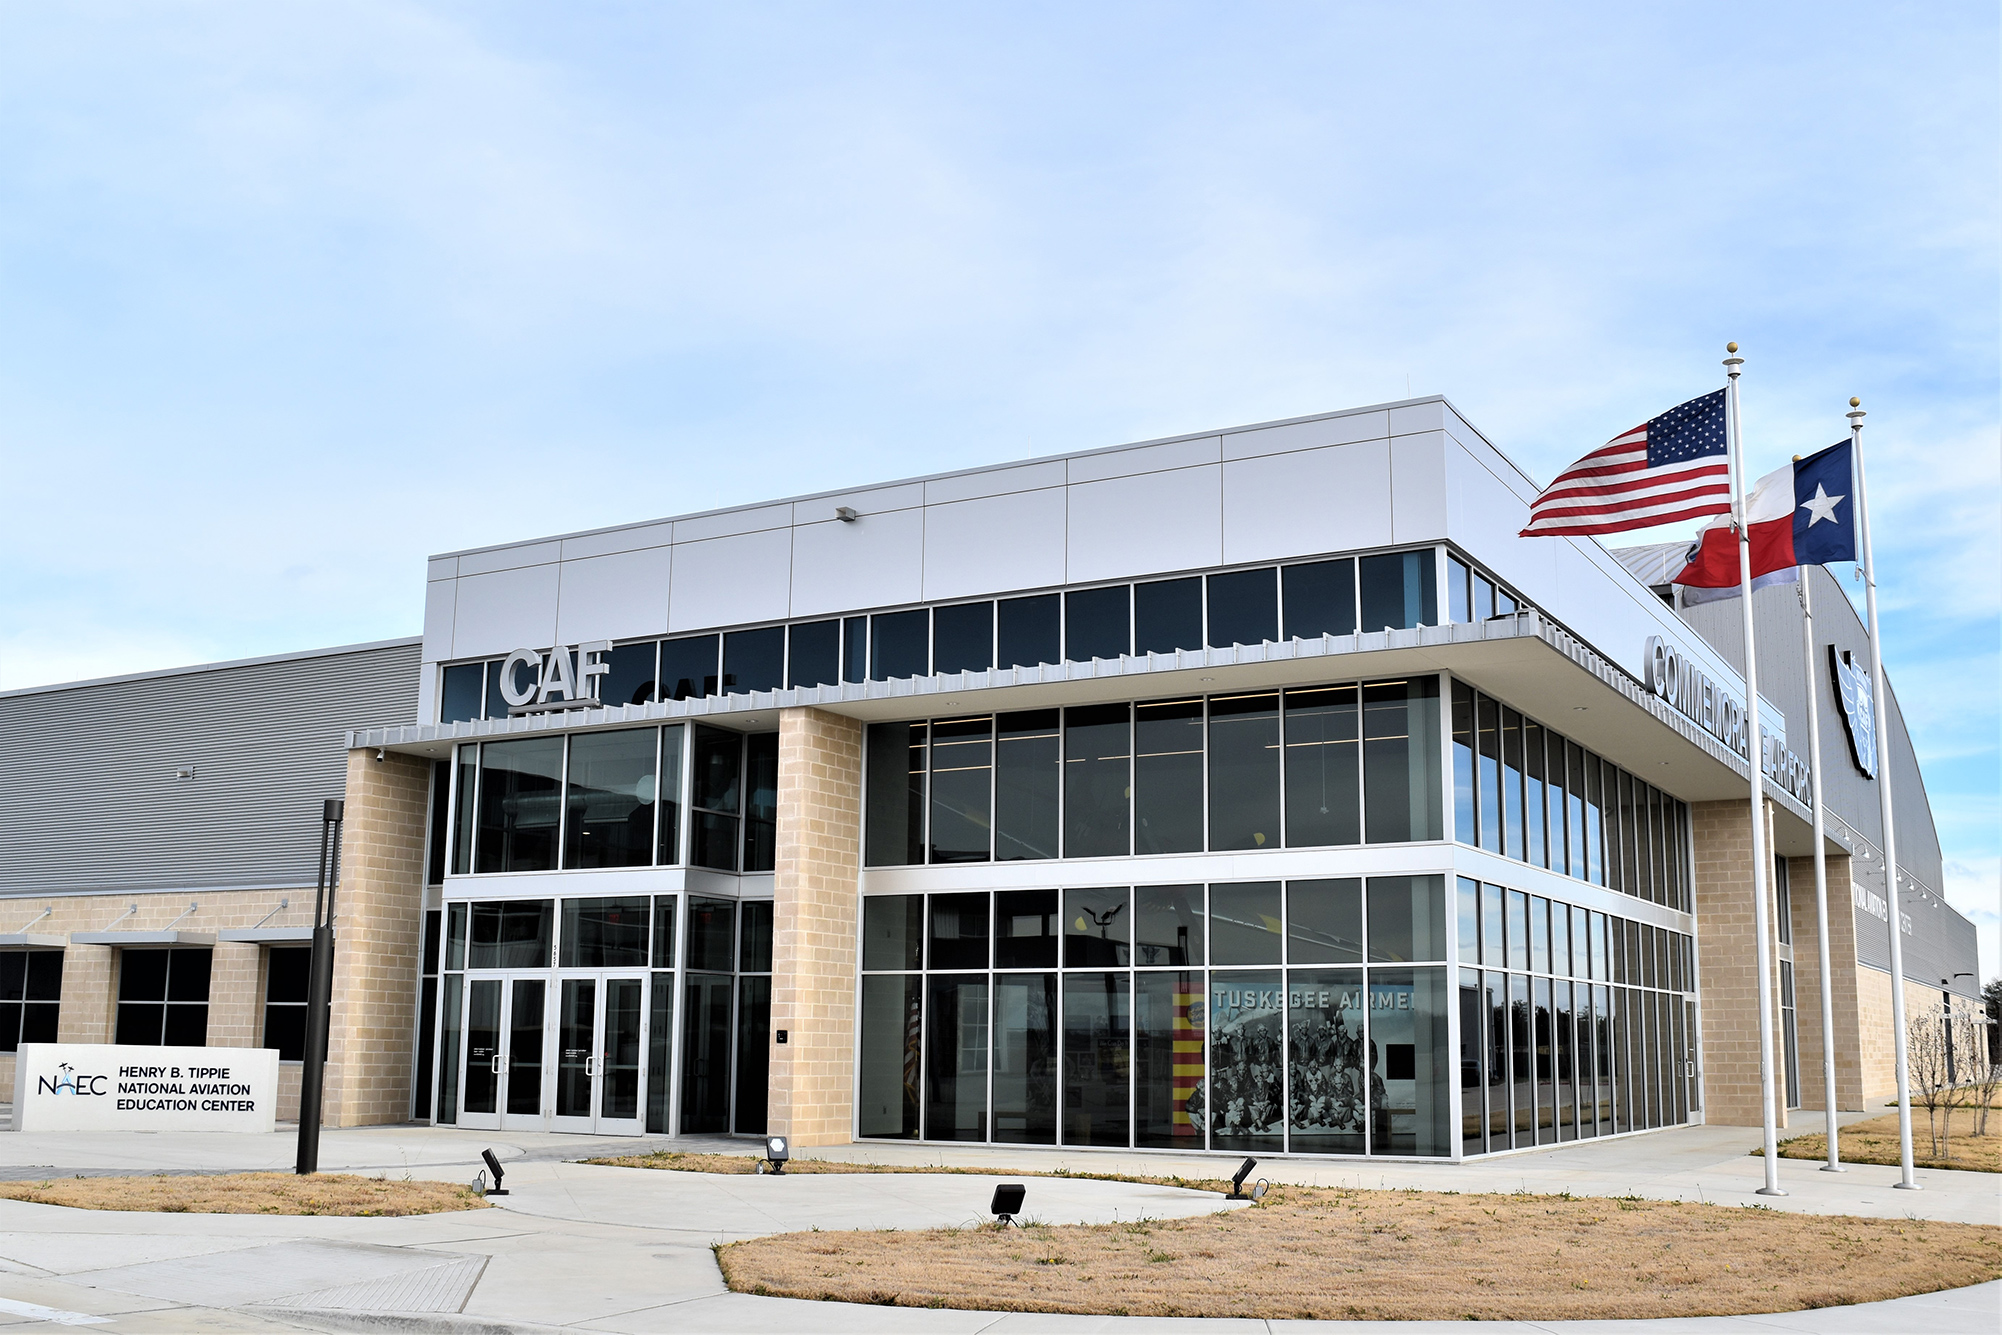 A broad view of the outside of the Henry B. Tippie National Aviation Education Center